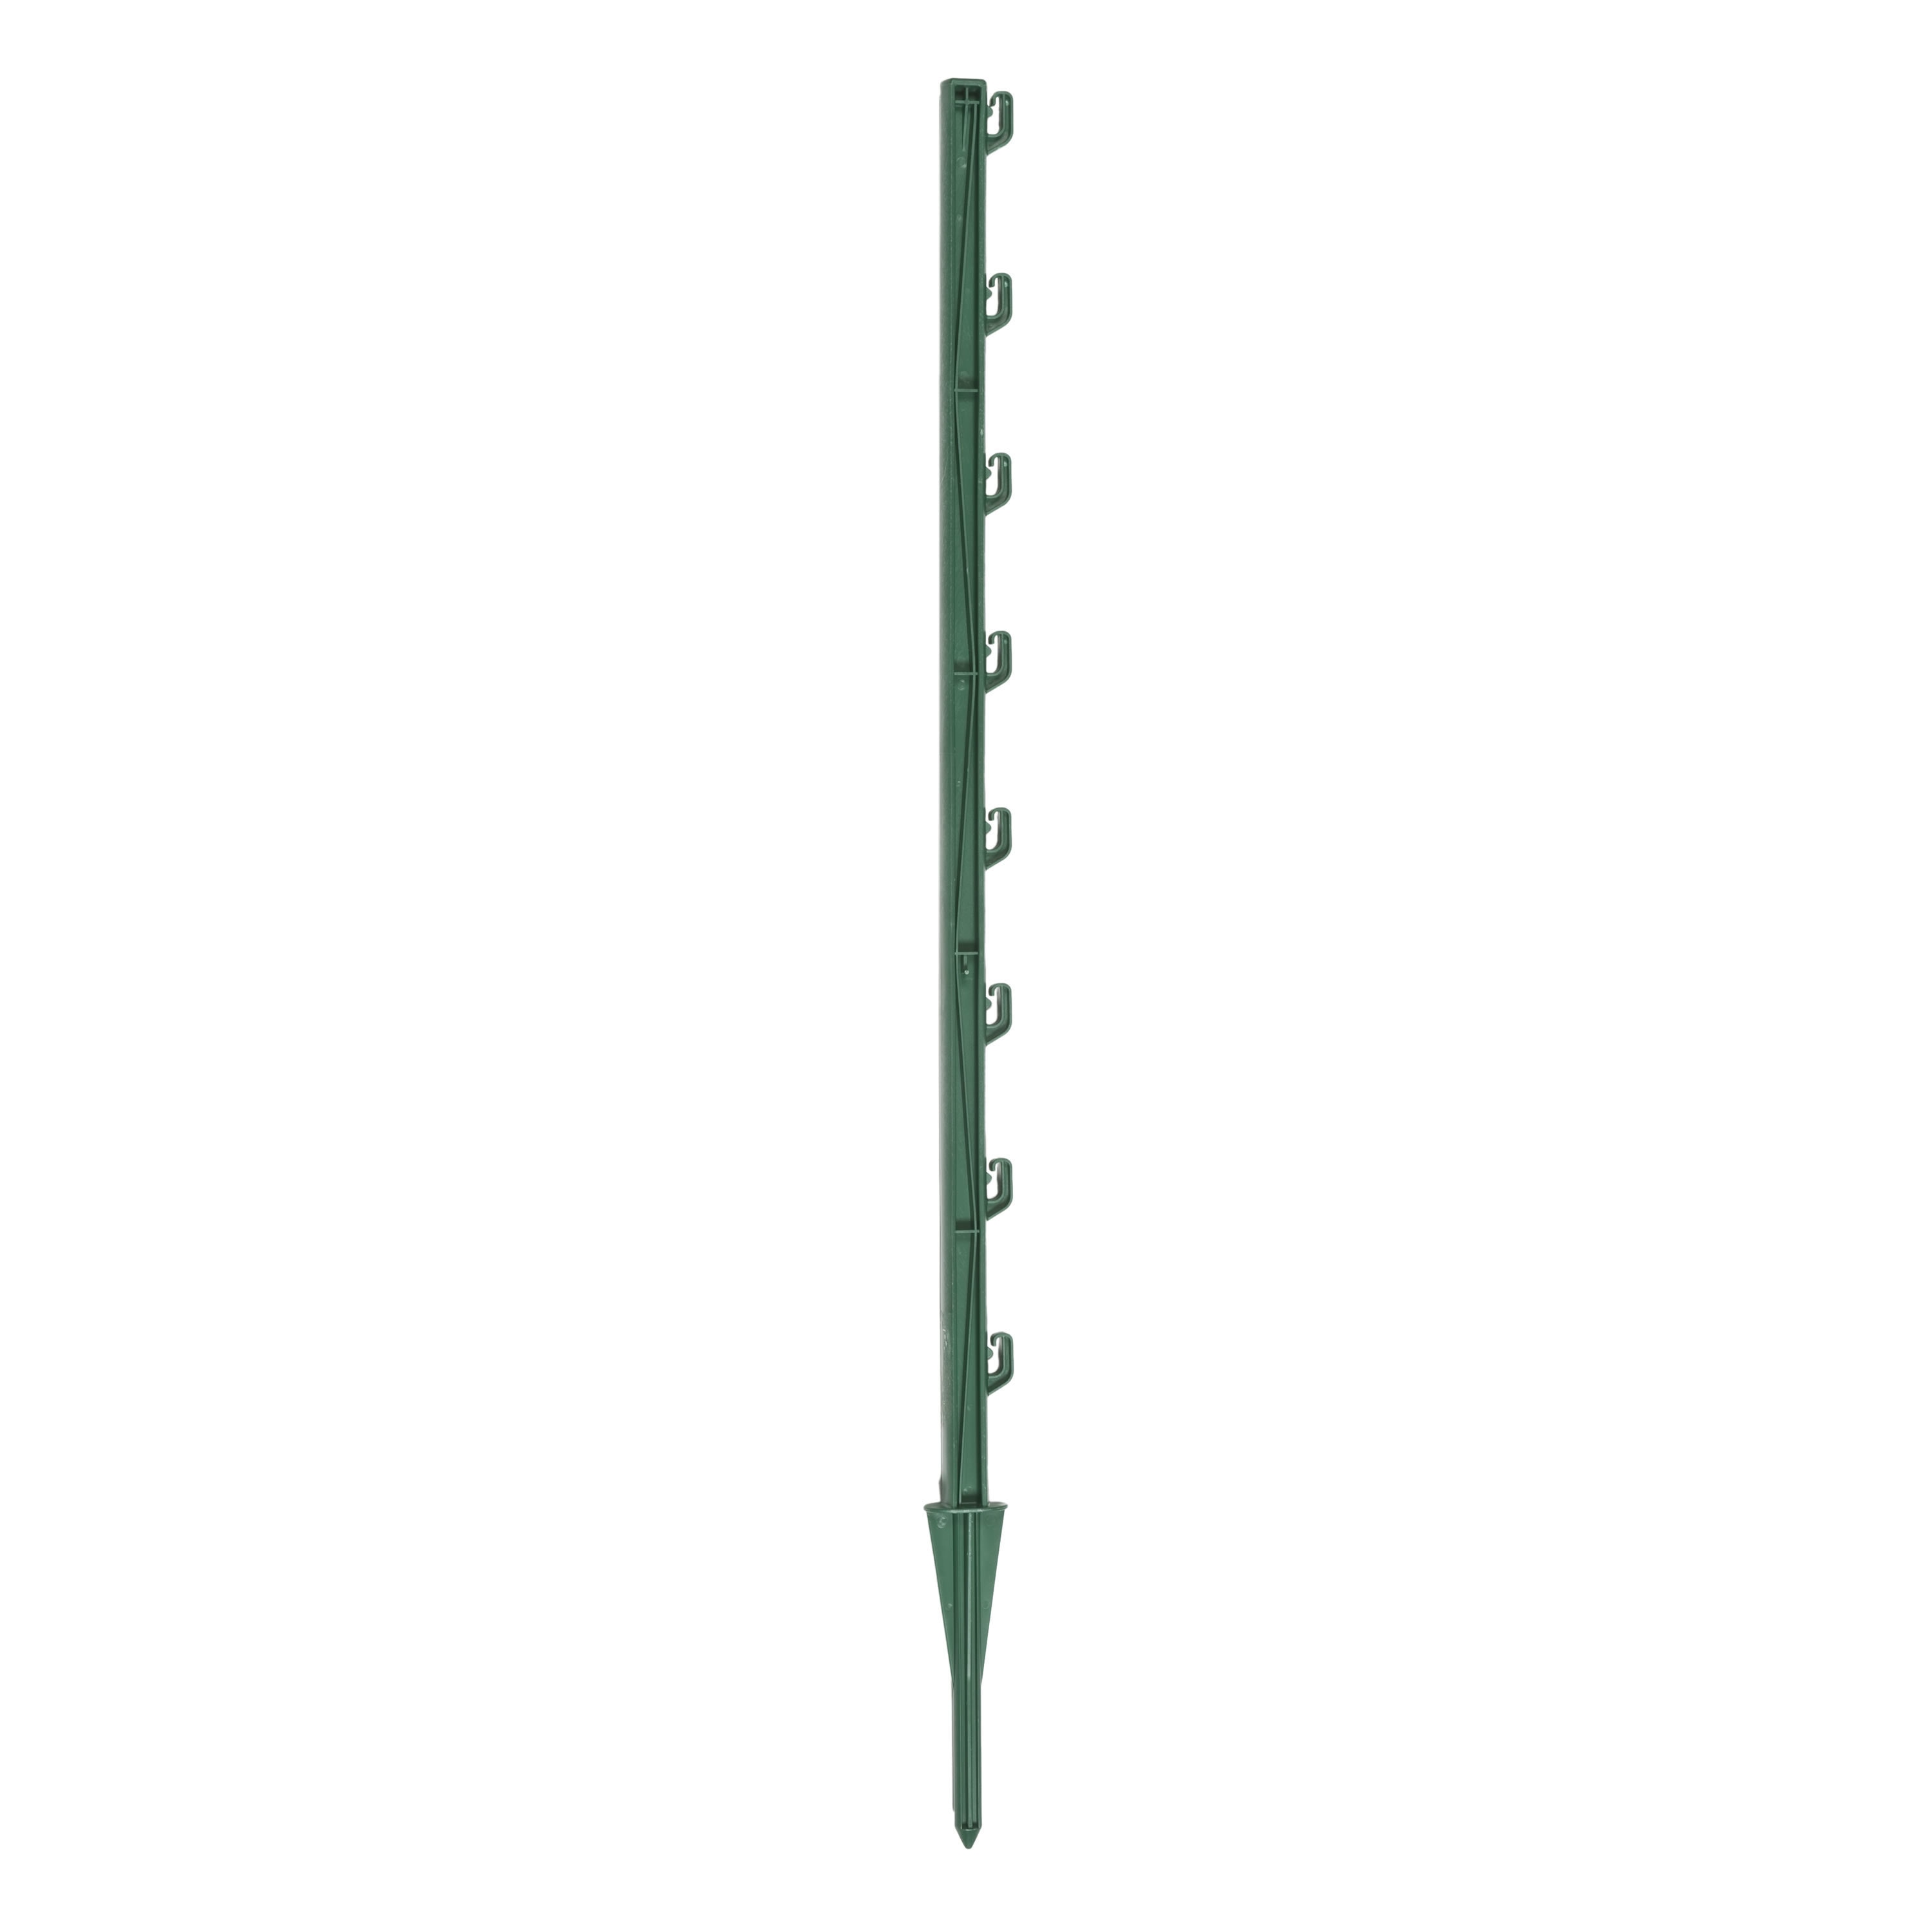 Hotline Poly Post 3FT Electric Fencing Plastic Posts Deals Great Quality 60 